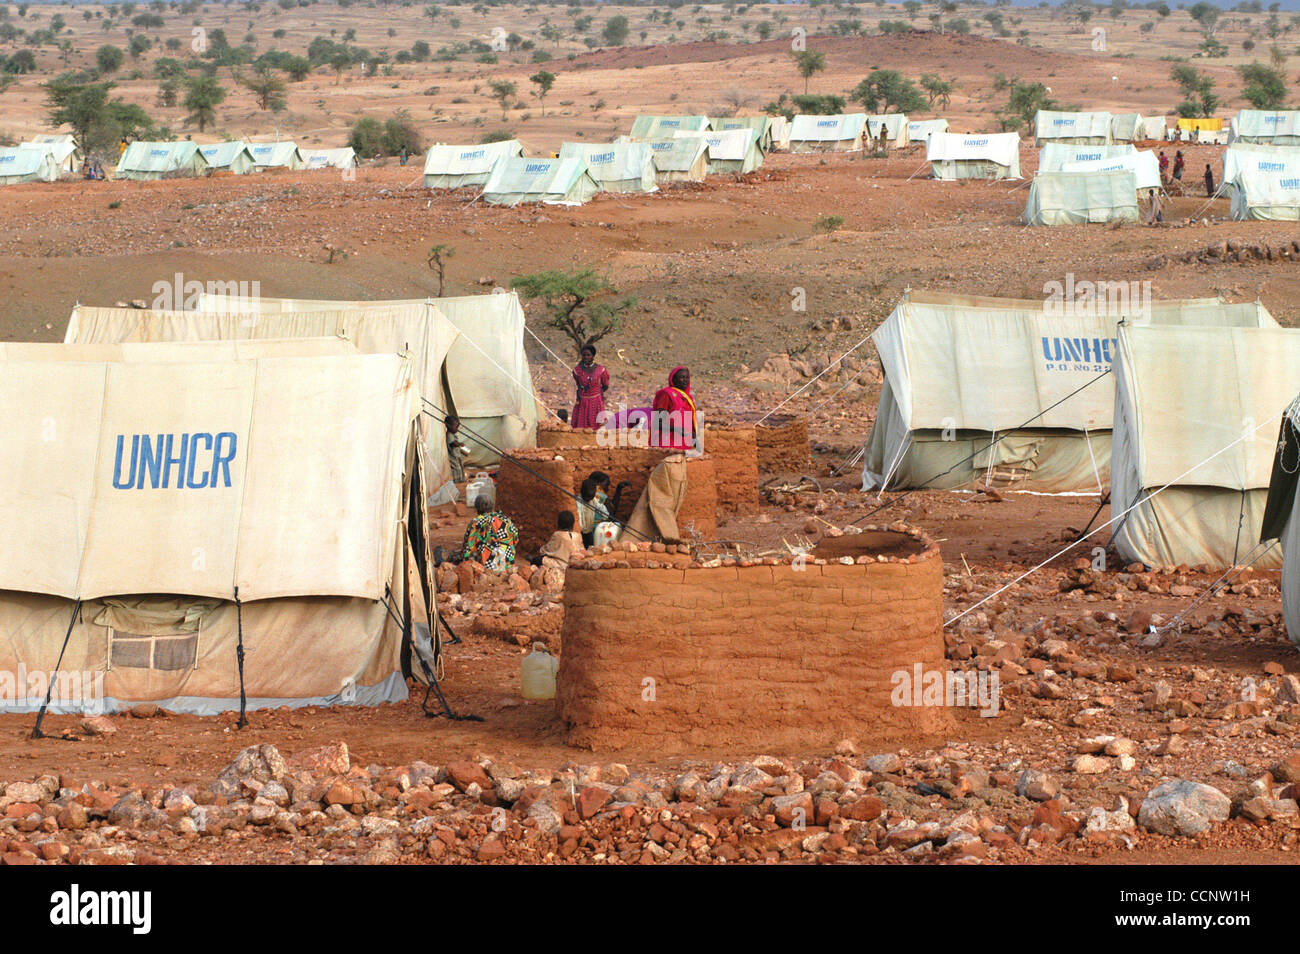 July 16, 2004 - Touloum, Chad -  A large refugee camp run by the United Nations in Eastern Chad houses tens of thousands of Sudanese refugees in tents near the border with neighboring Darfur.  (Credit: David Snyder/ZUMA Press) Stock Photo